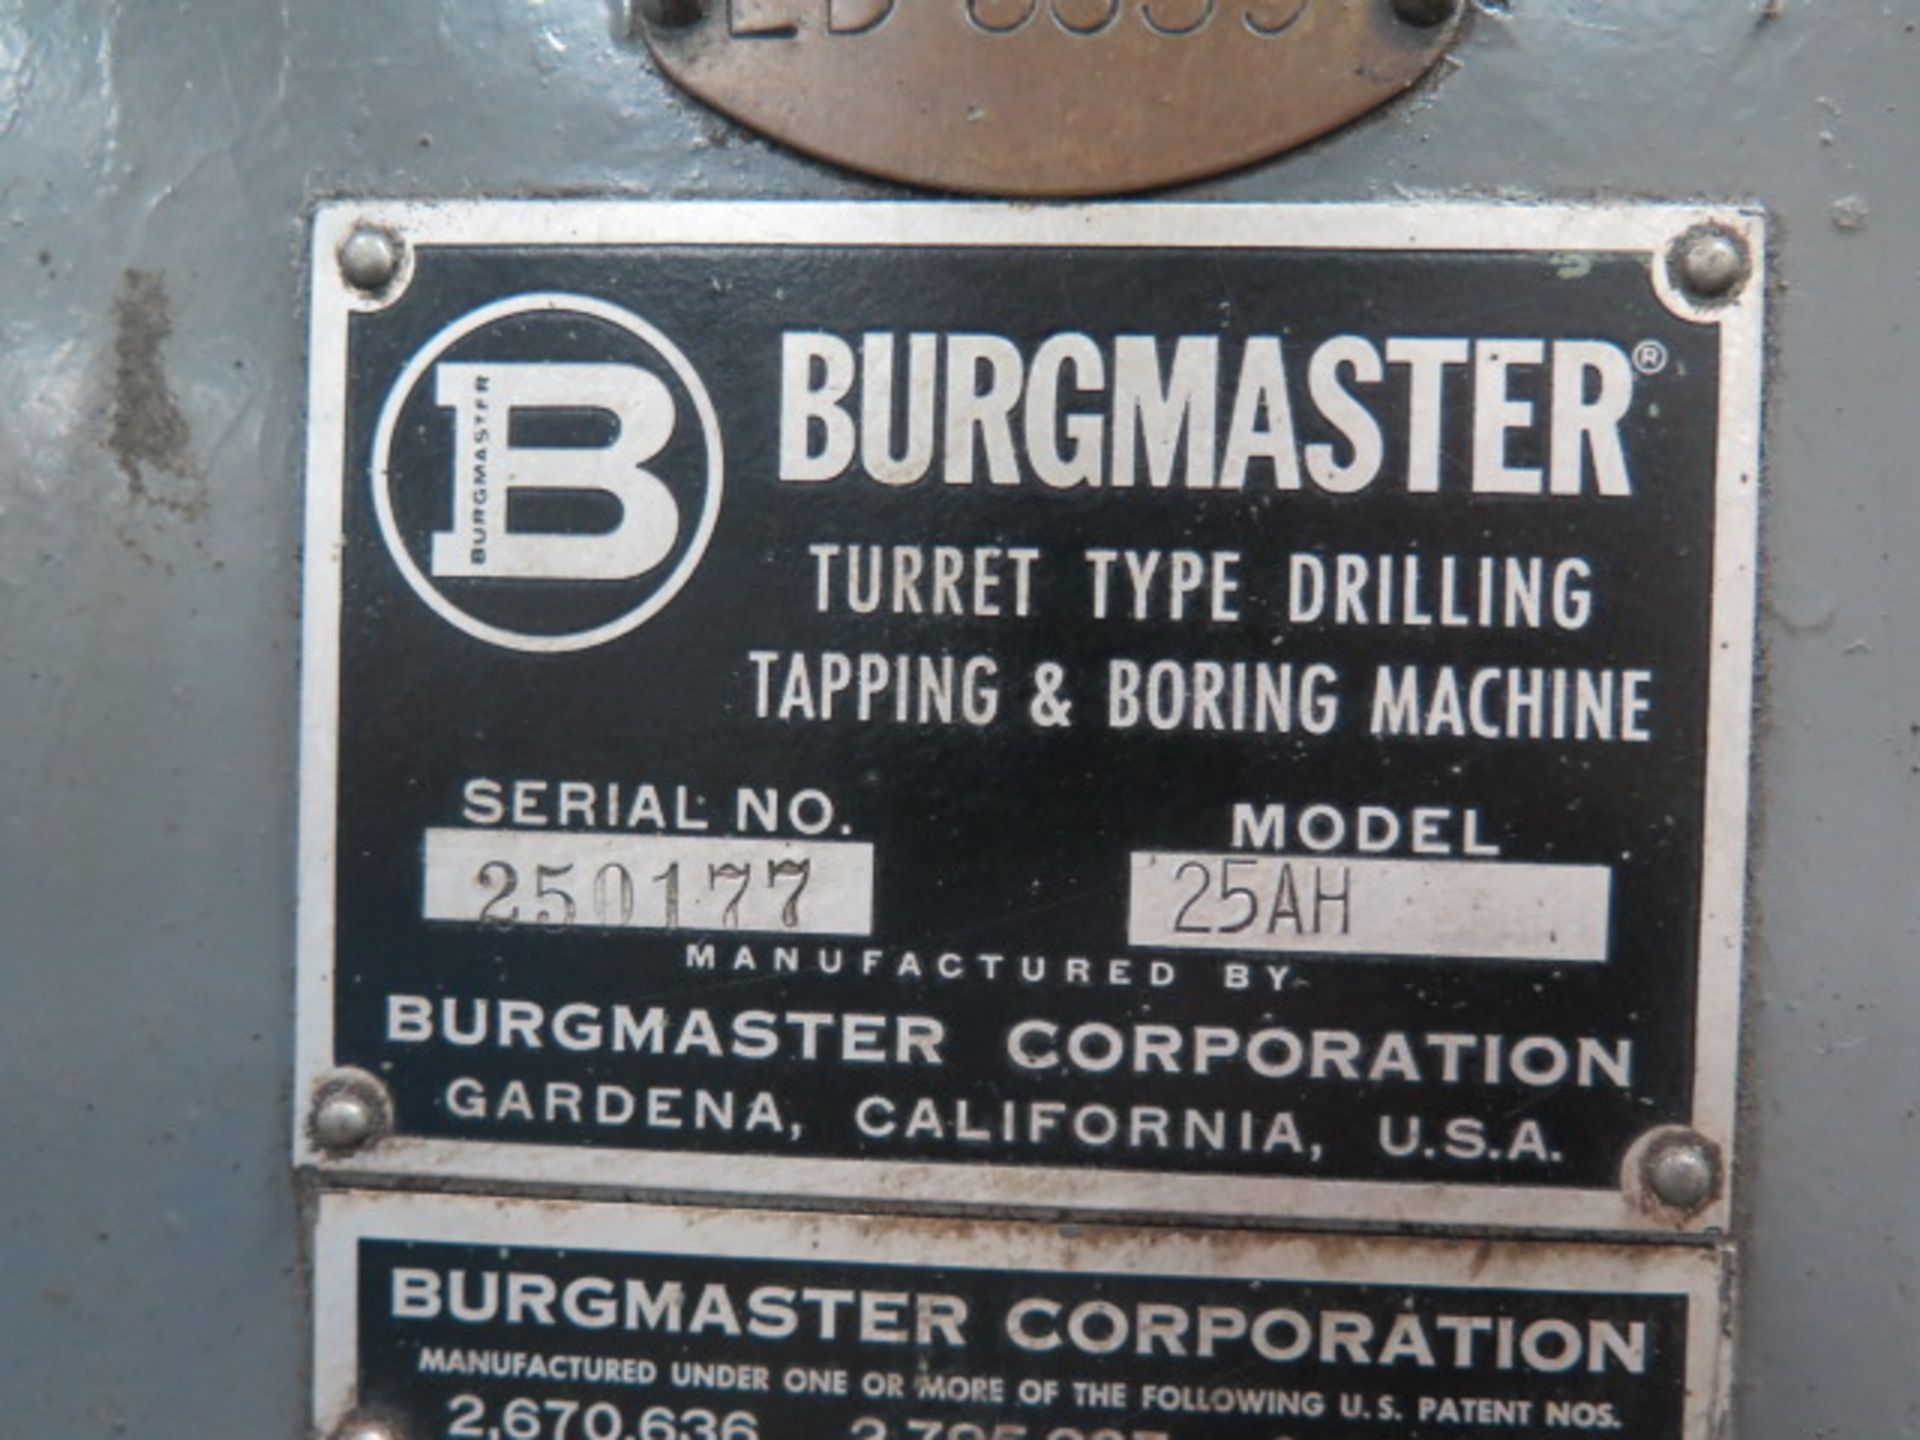 Burgmaster mdl. 25AH 6-Station Power Turret Drill s/n 250177 w/ 100-2900 RPM, SOLD AS IS - Image 15 of 15